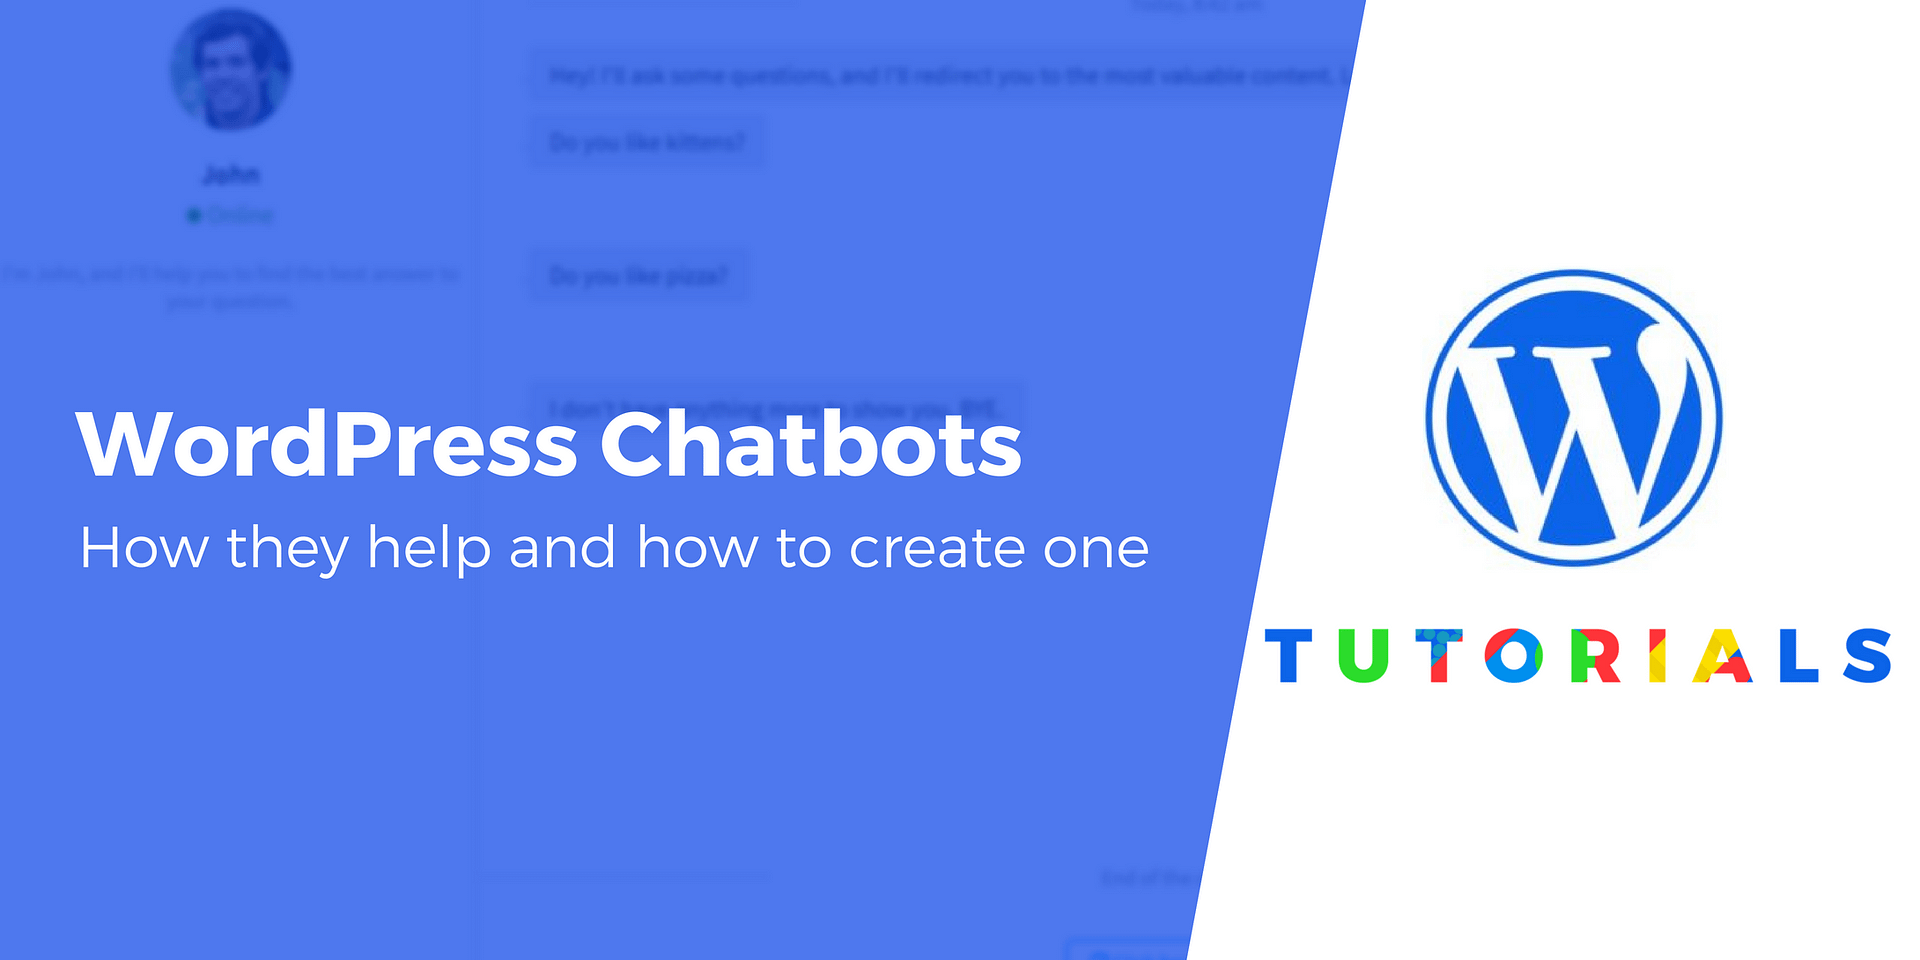 WordPress Chatbots: How to Create Them, Plus Their Benefits